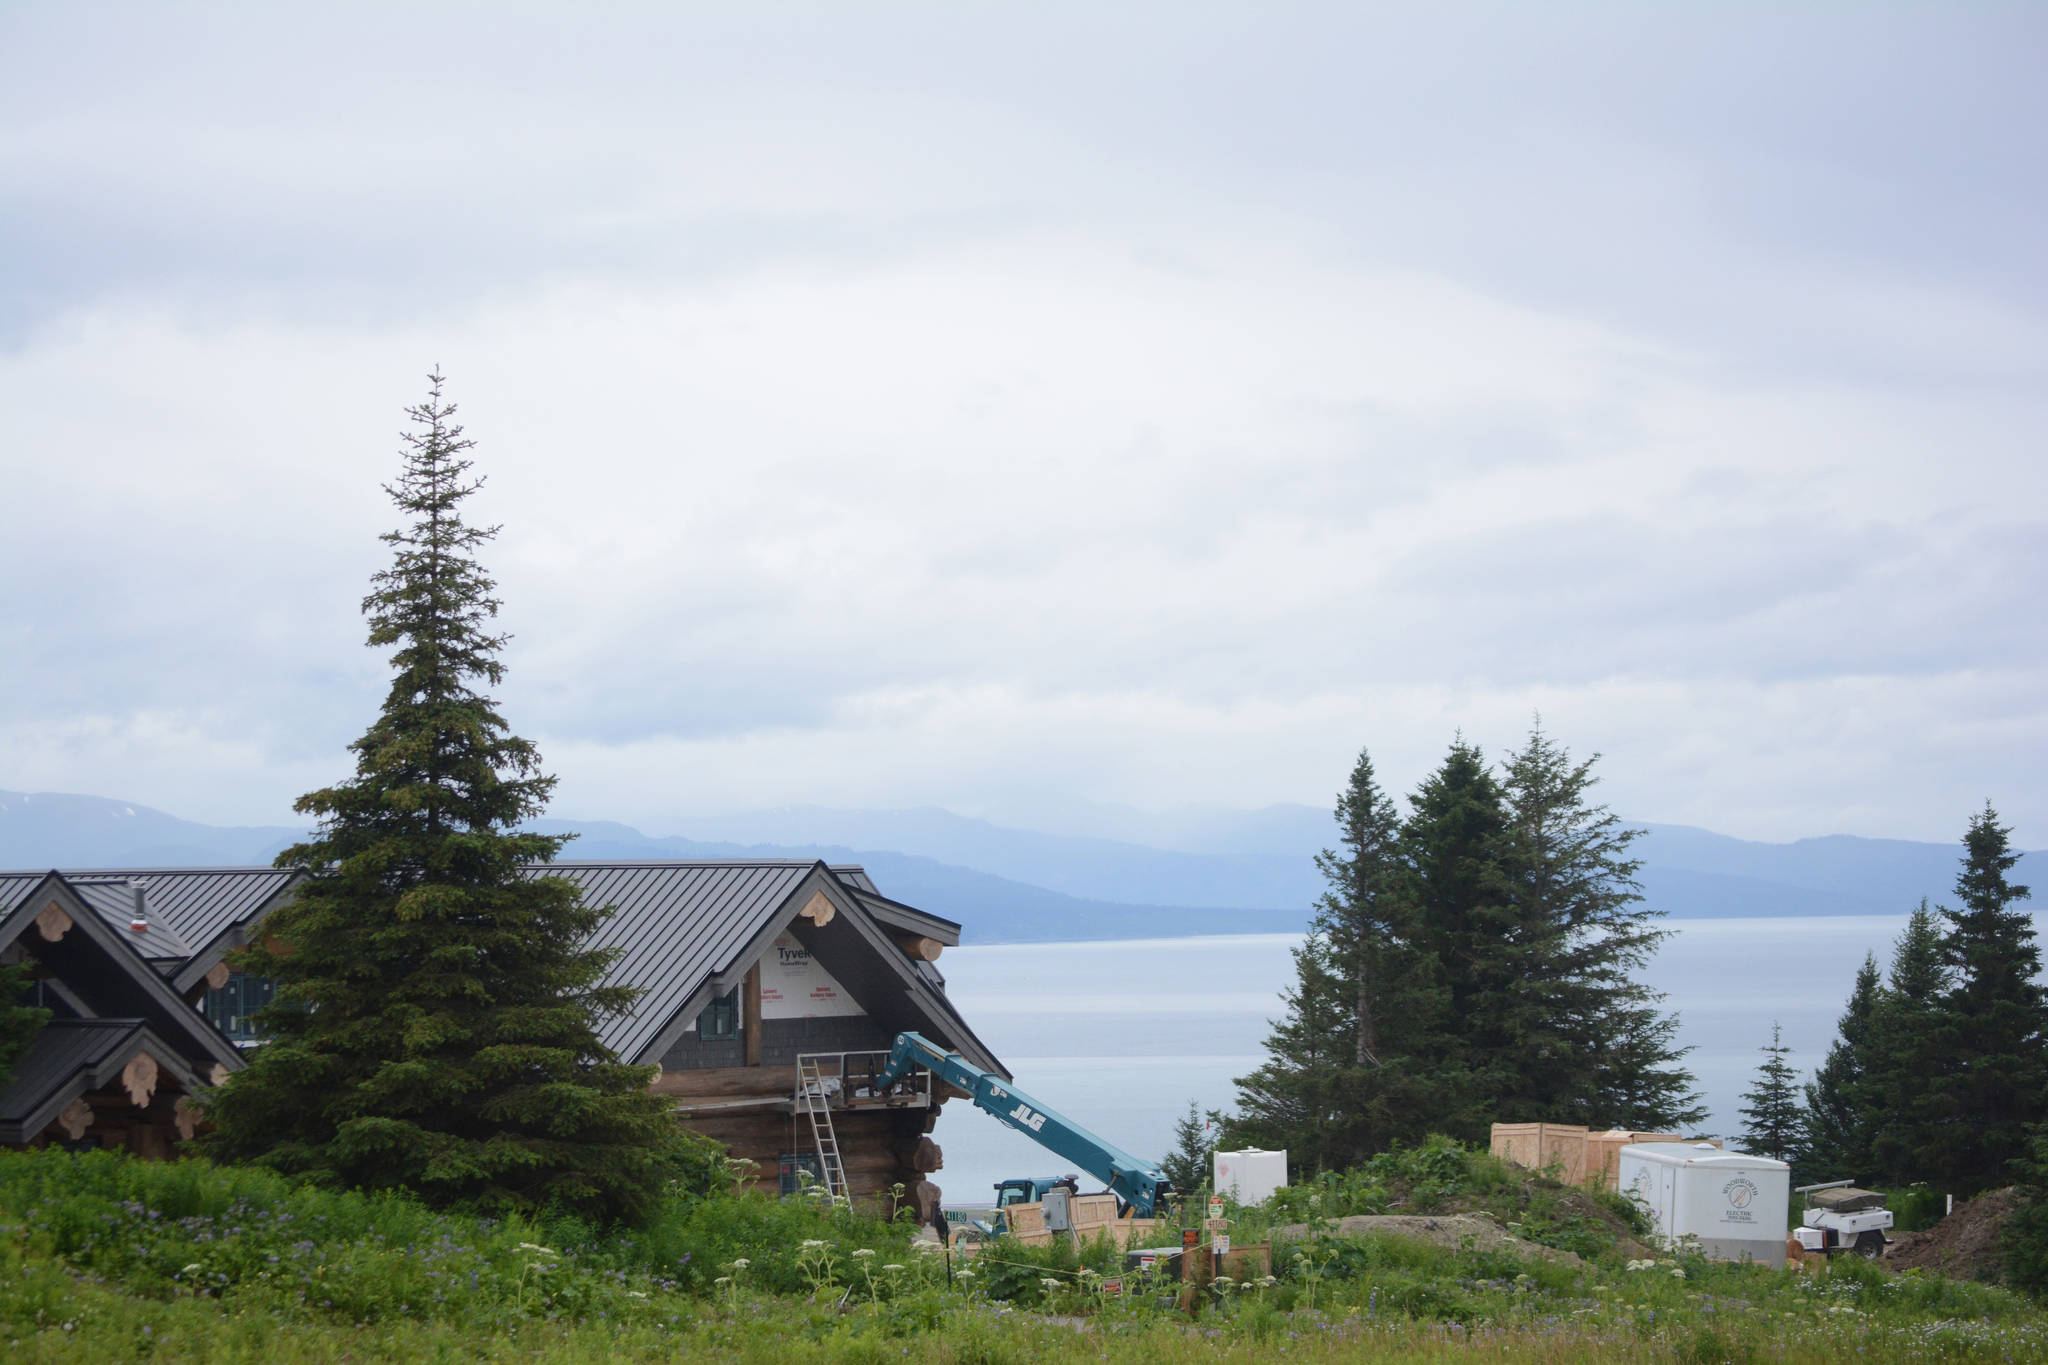 Part of country-western singer Zac Brown’s log home is visible from Dorothy Drive overlooking Kachemak Bay in Homer, Alaska in this photo taken on July 9, 2018. A pedestrian easement to the right in this photo runs between Brown’s property and his neighbor. Brown and other neighbors at the end of the rural road have petitioned to vacate a north-south section line easement that crosses Dorothy Drive and also runs south to a neighboring subdivision. (Photo by Michael Armstrong/Homer News)